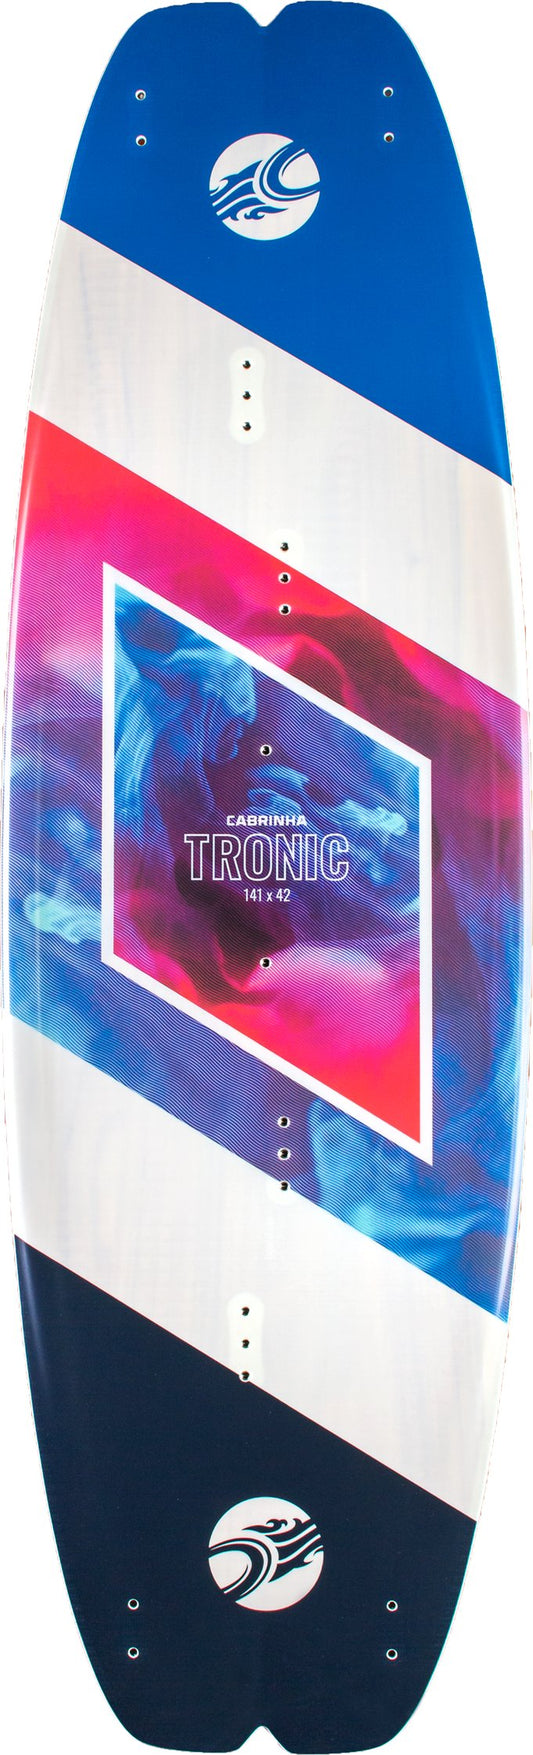 Cabrinha 02S Tronic Board Only